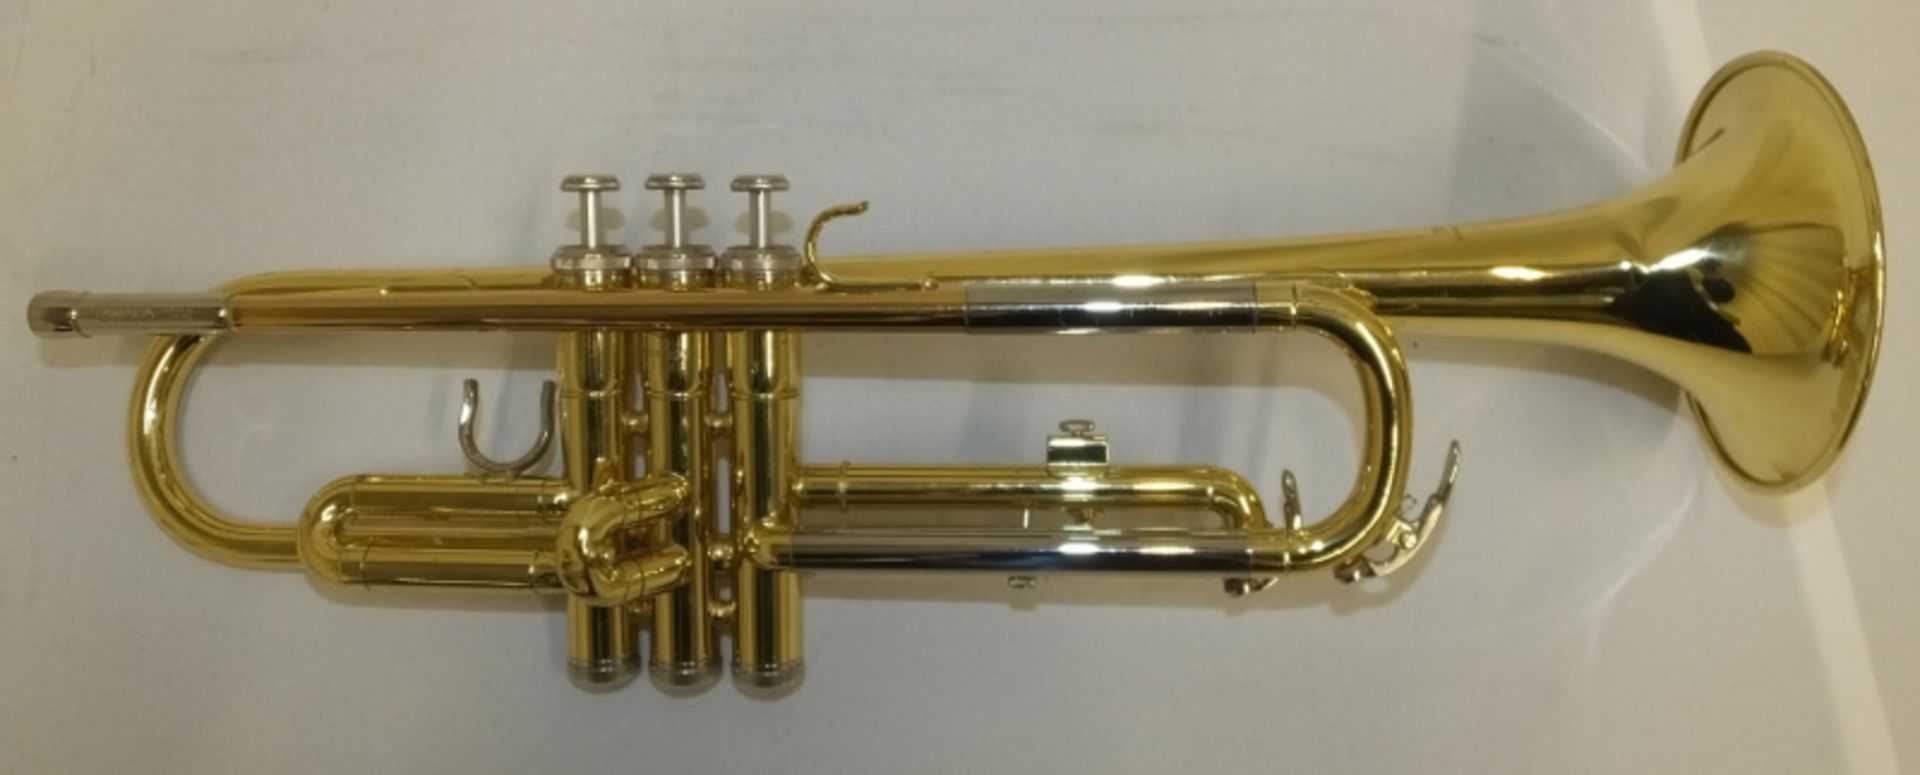 Yamaha YTR 2320E Trumpet in case - serial number 313803 - Please check photos carefully - Image 3 of 12